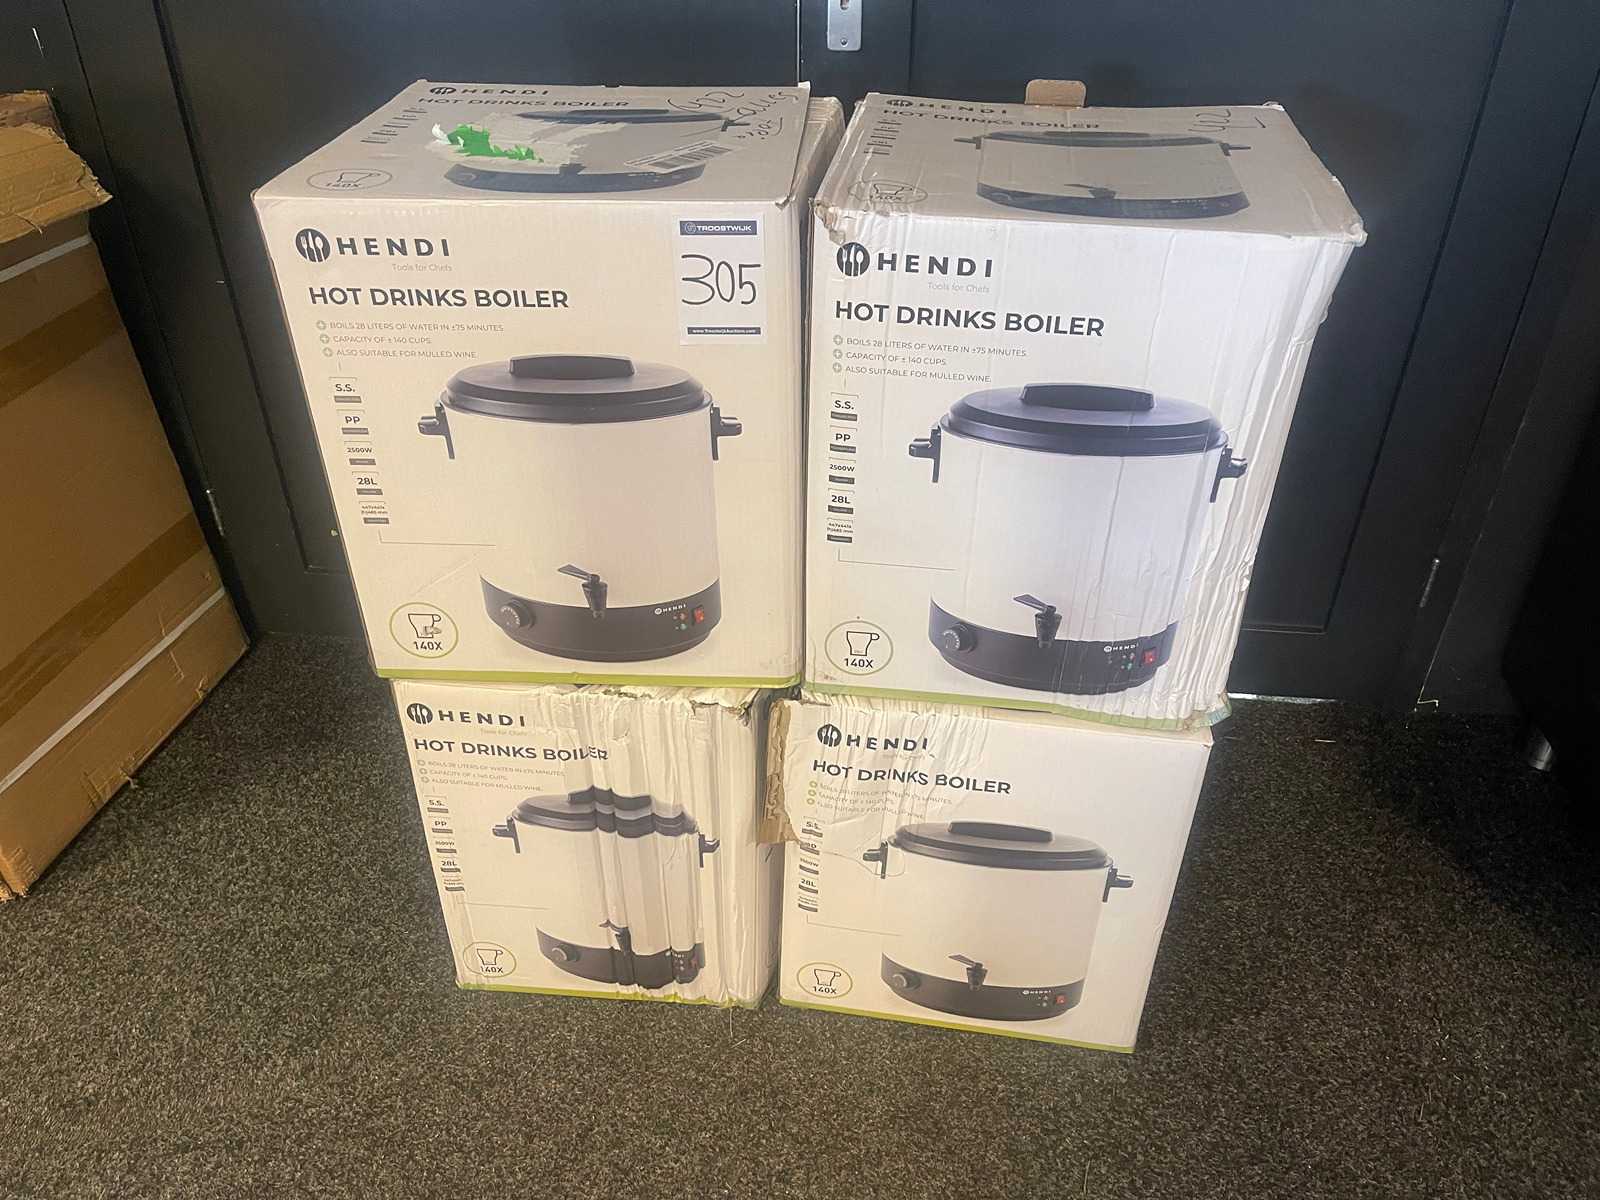 Rice cooker 10 L - HENDI Tools for Chefs